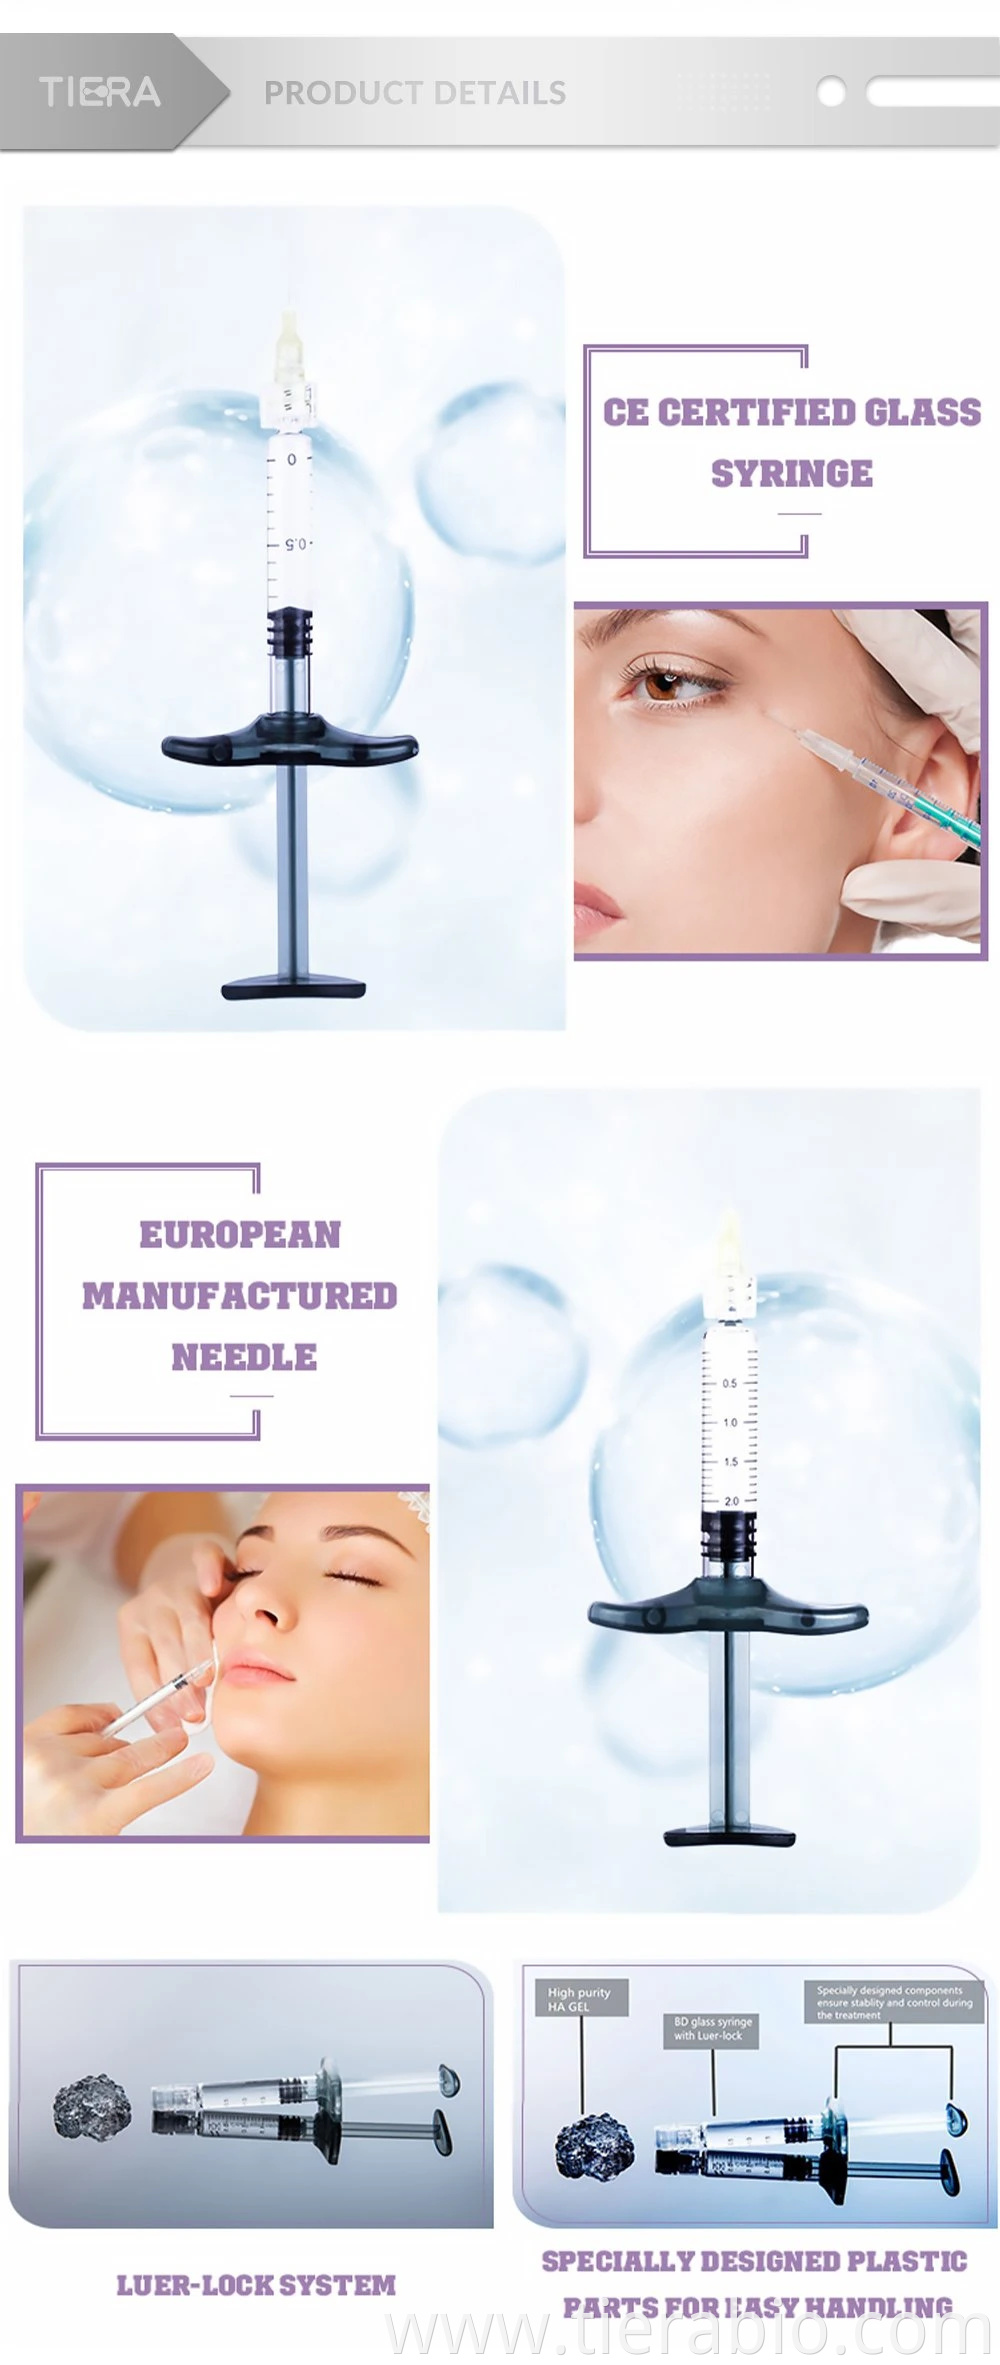 Best Products Lasting Sodium Hyaluronate Gel Hyaluronic Acid Injectable Dermal Fillers 2ml Face Injection